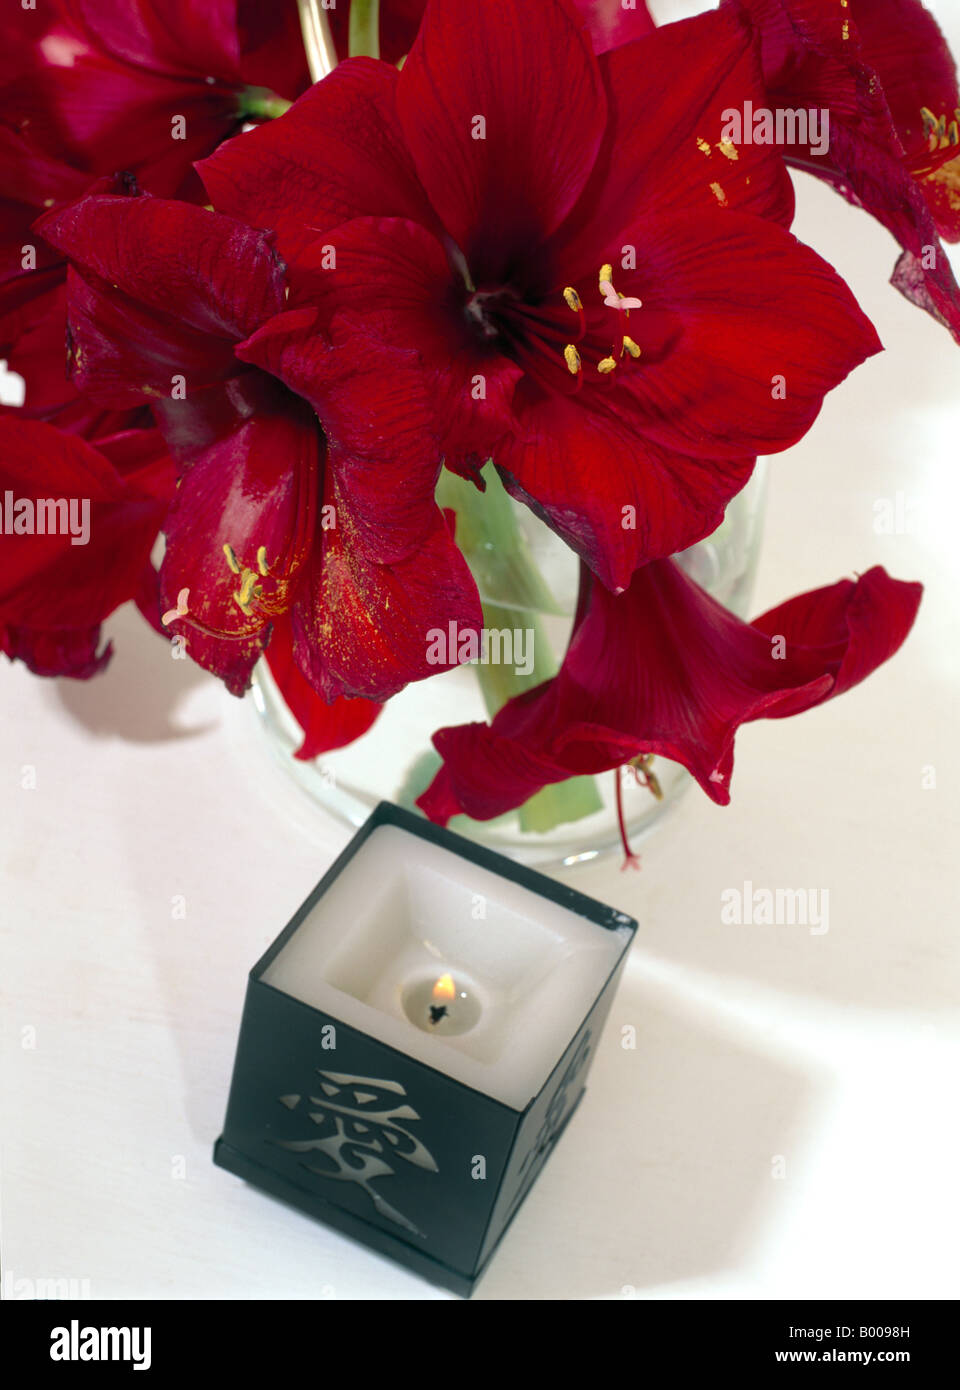 Feng Shui Candle with Calligraphy & Red Amarylis Stock Photo